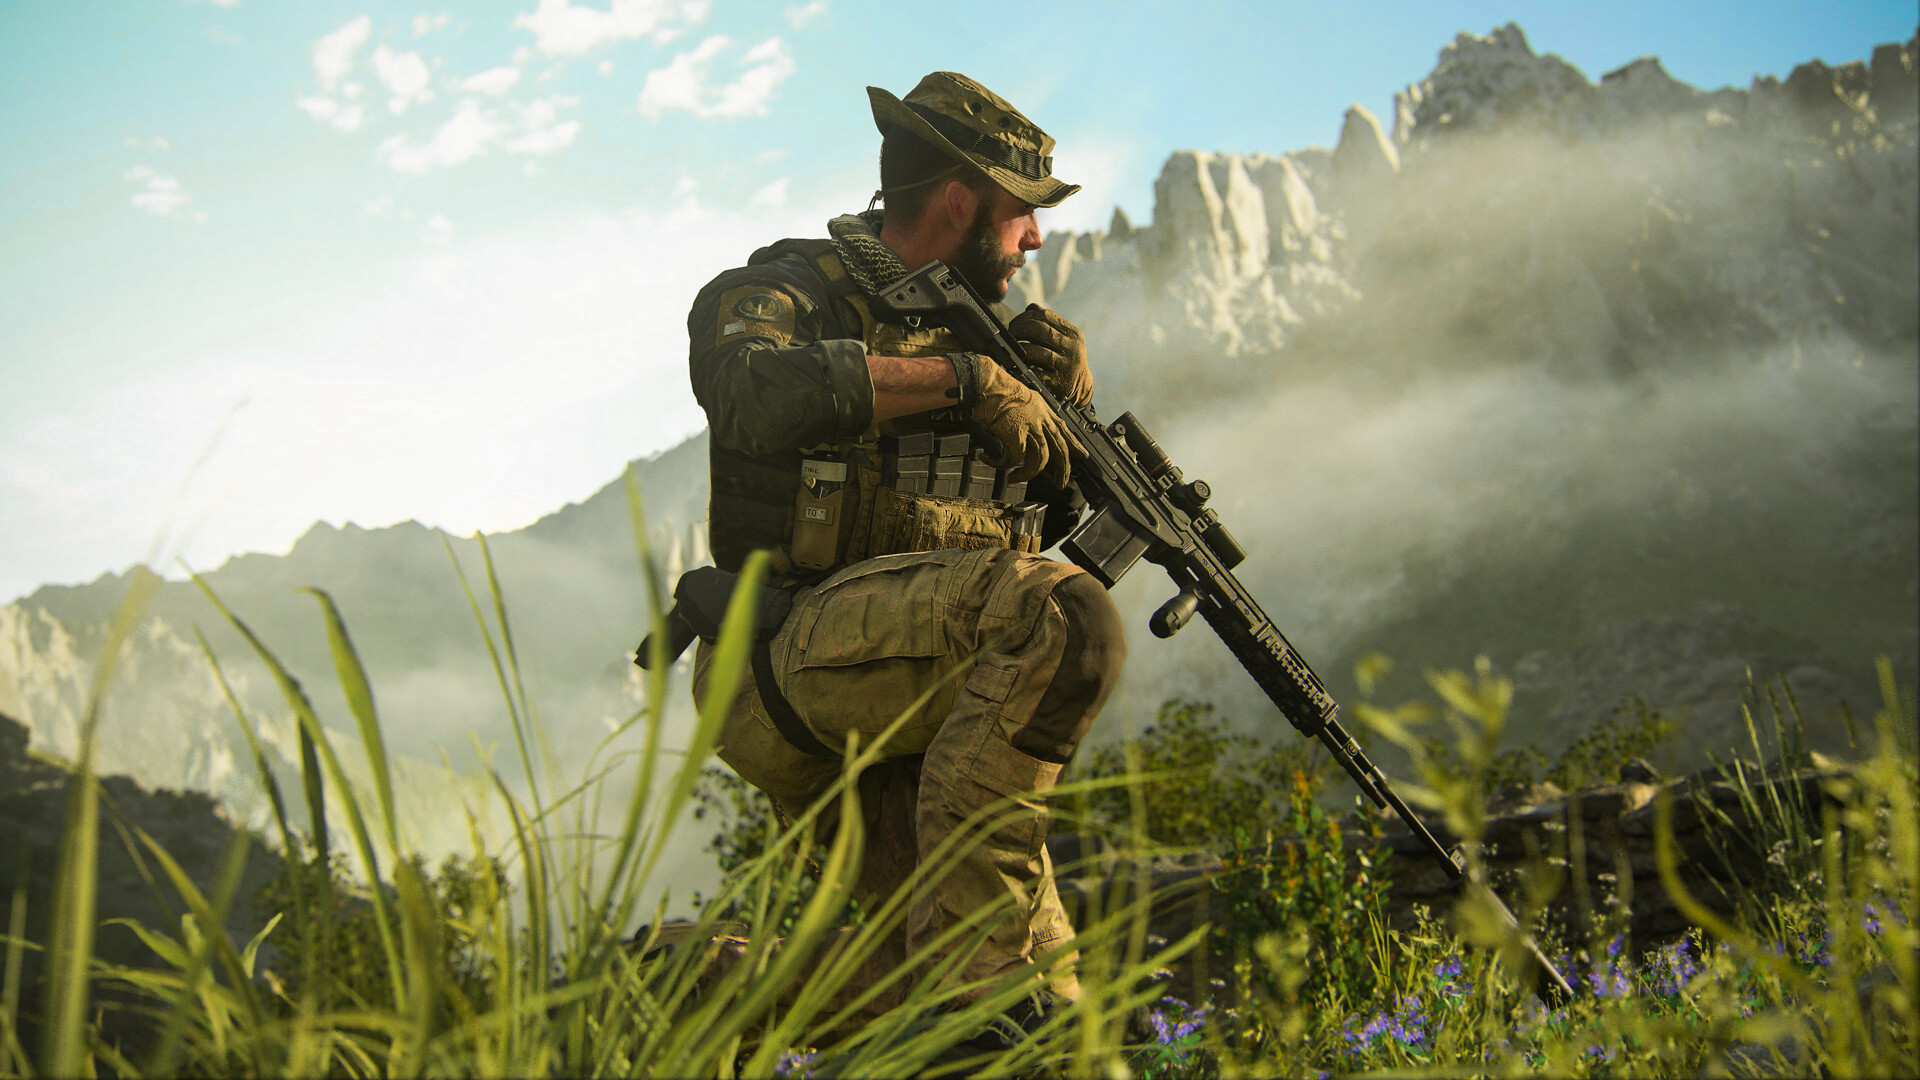 Captain Price crouches in tall grass in an open-world campaign mission in Call of Duty: Modern Warfare 3